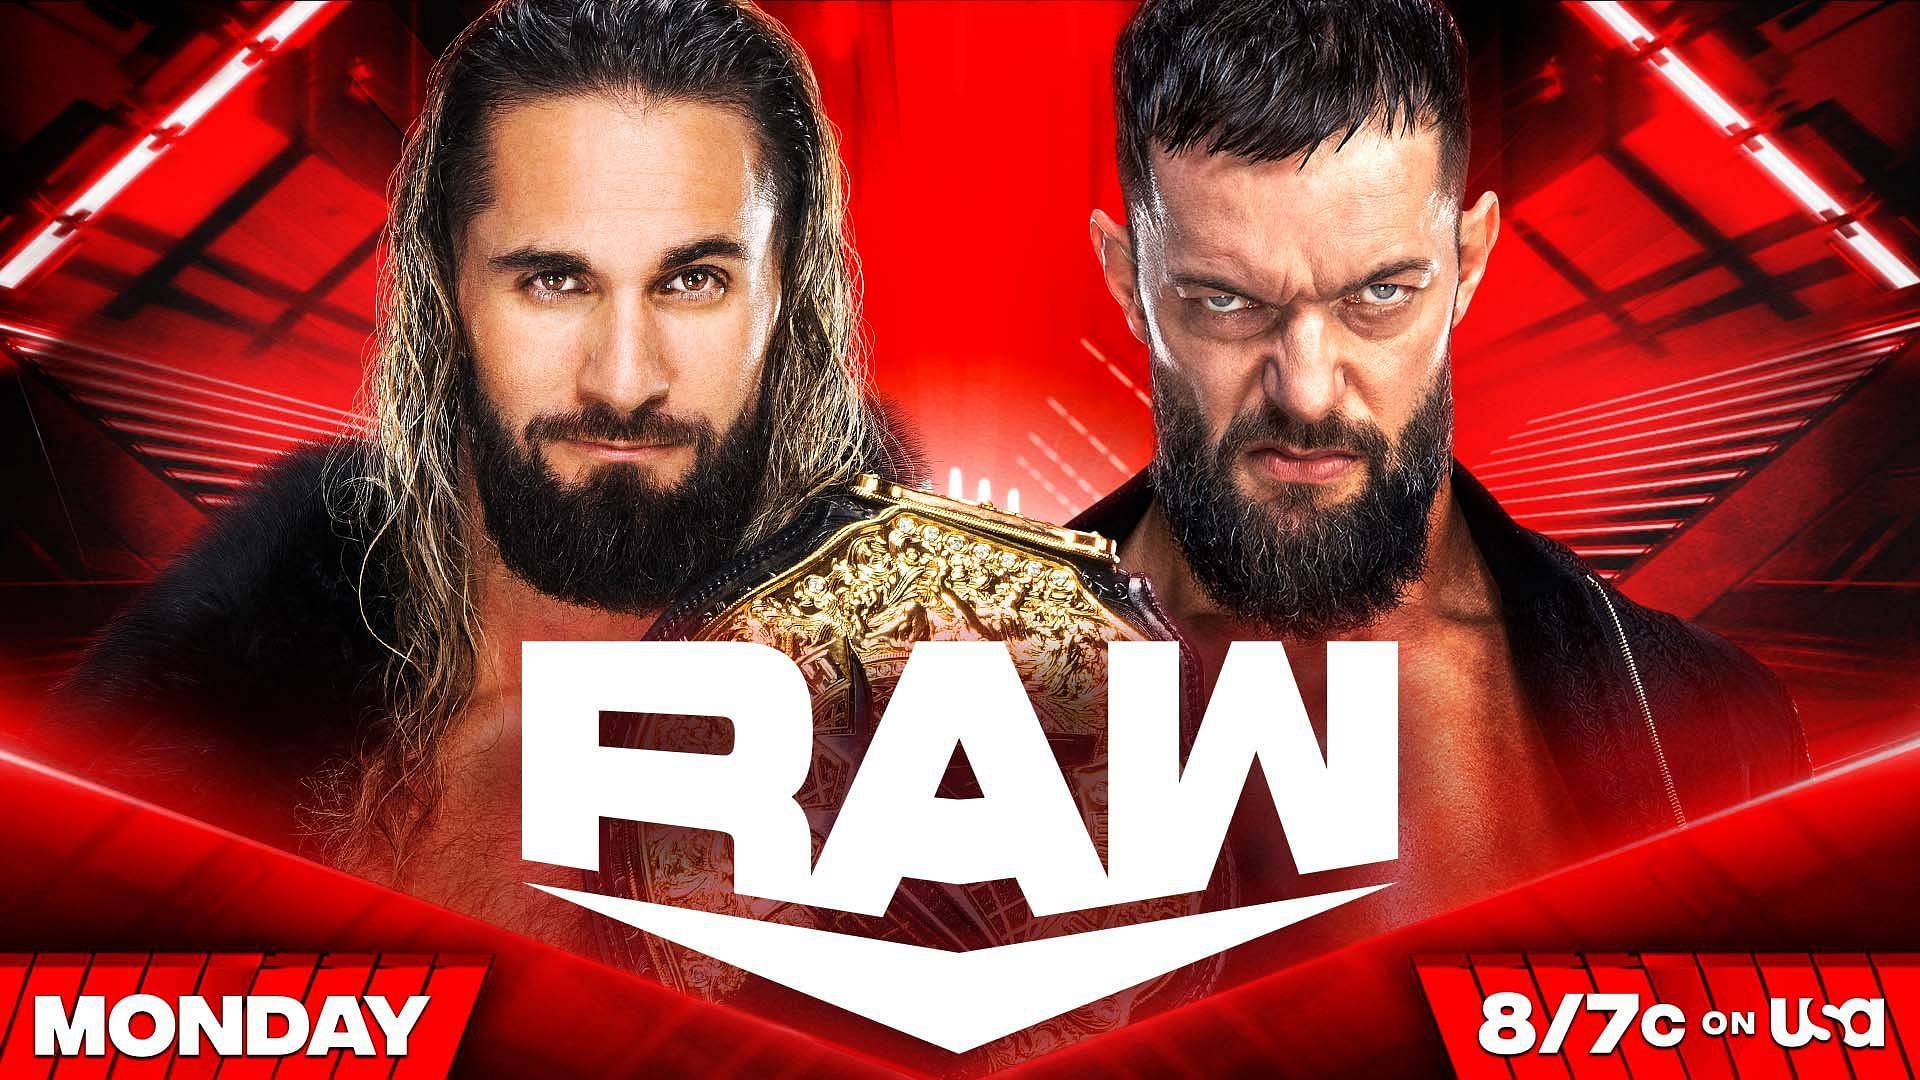 Seth Rollins and Finn Balor will have a contract signing on WWE RAW